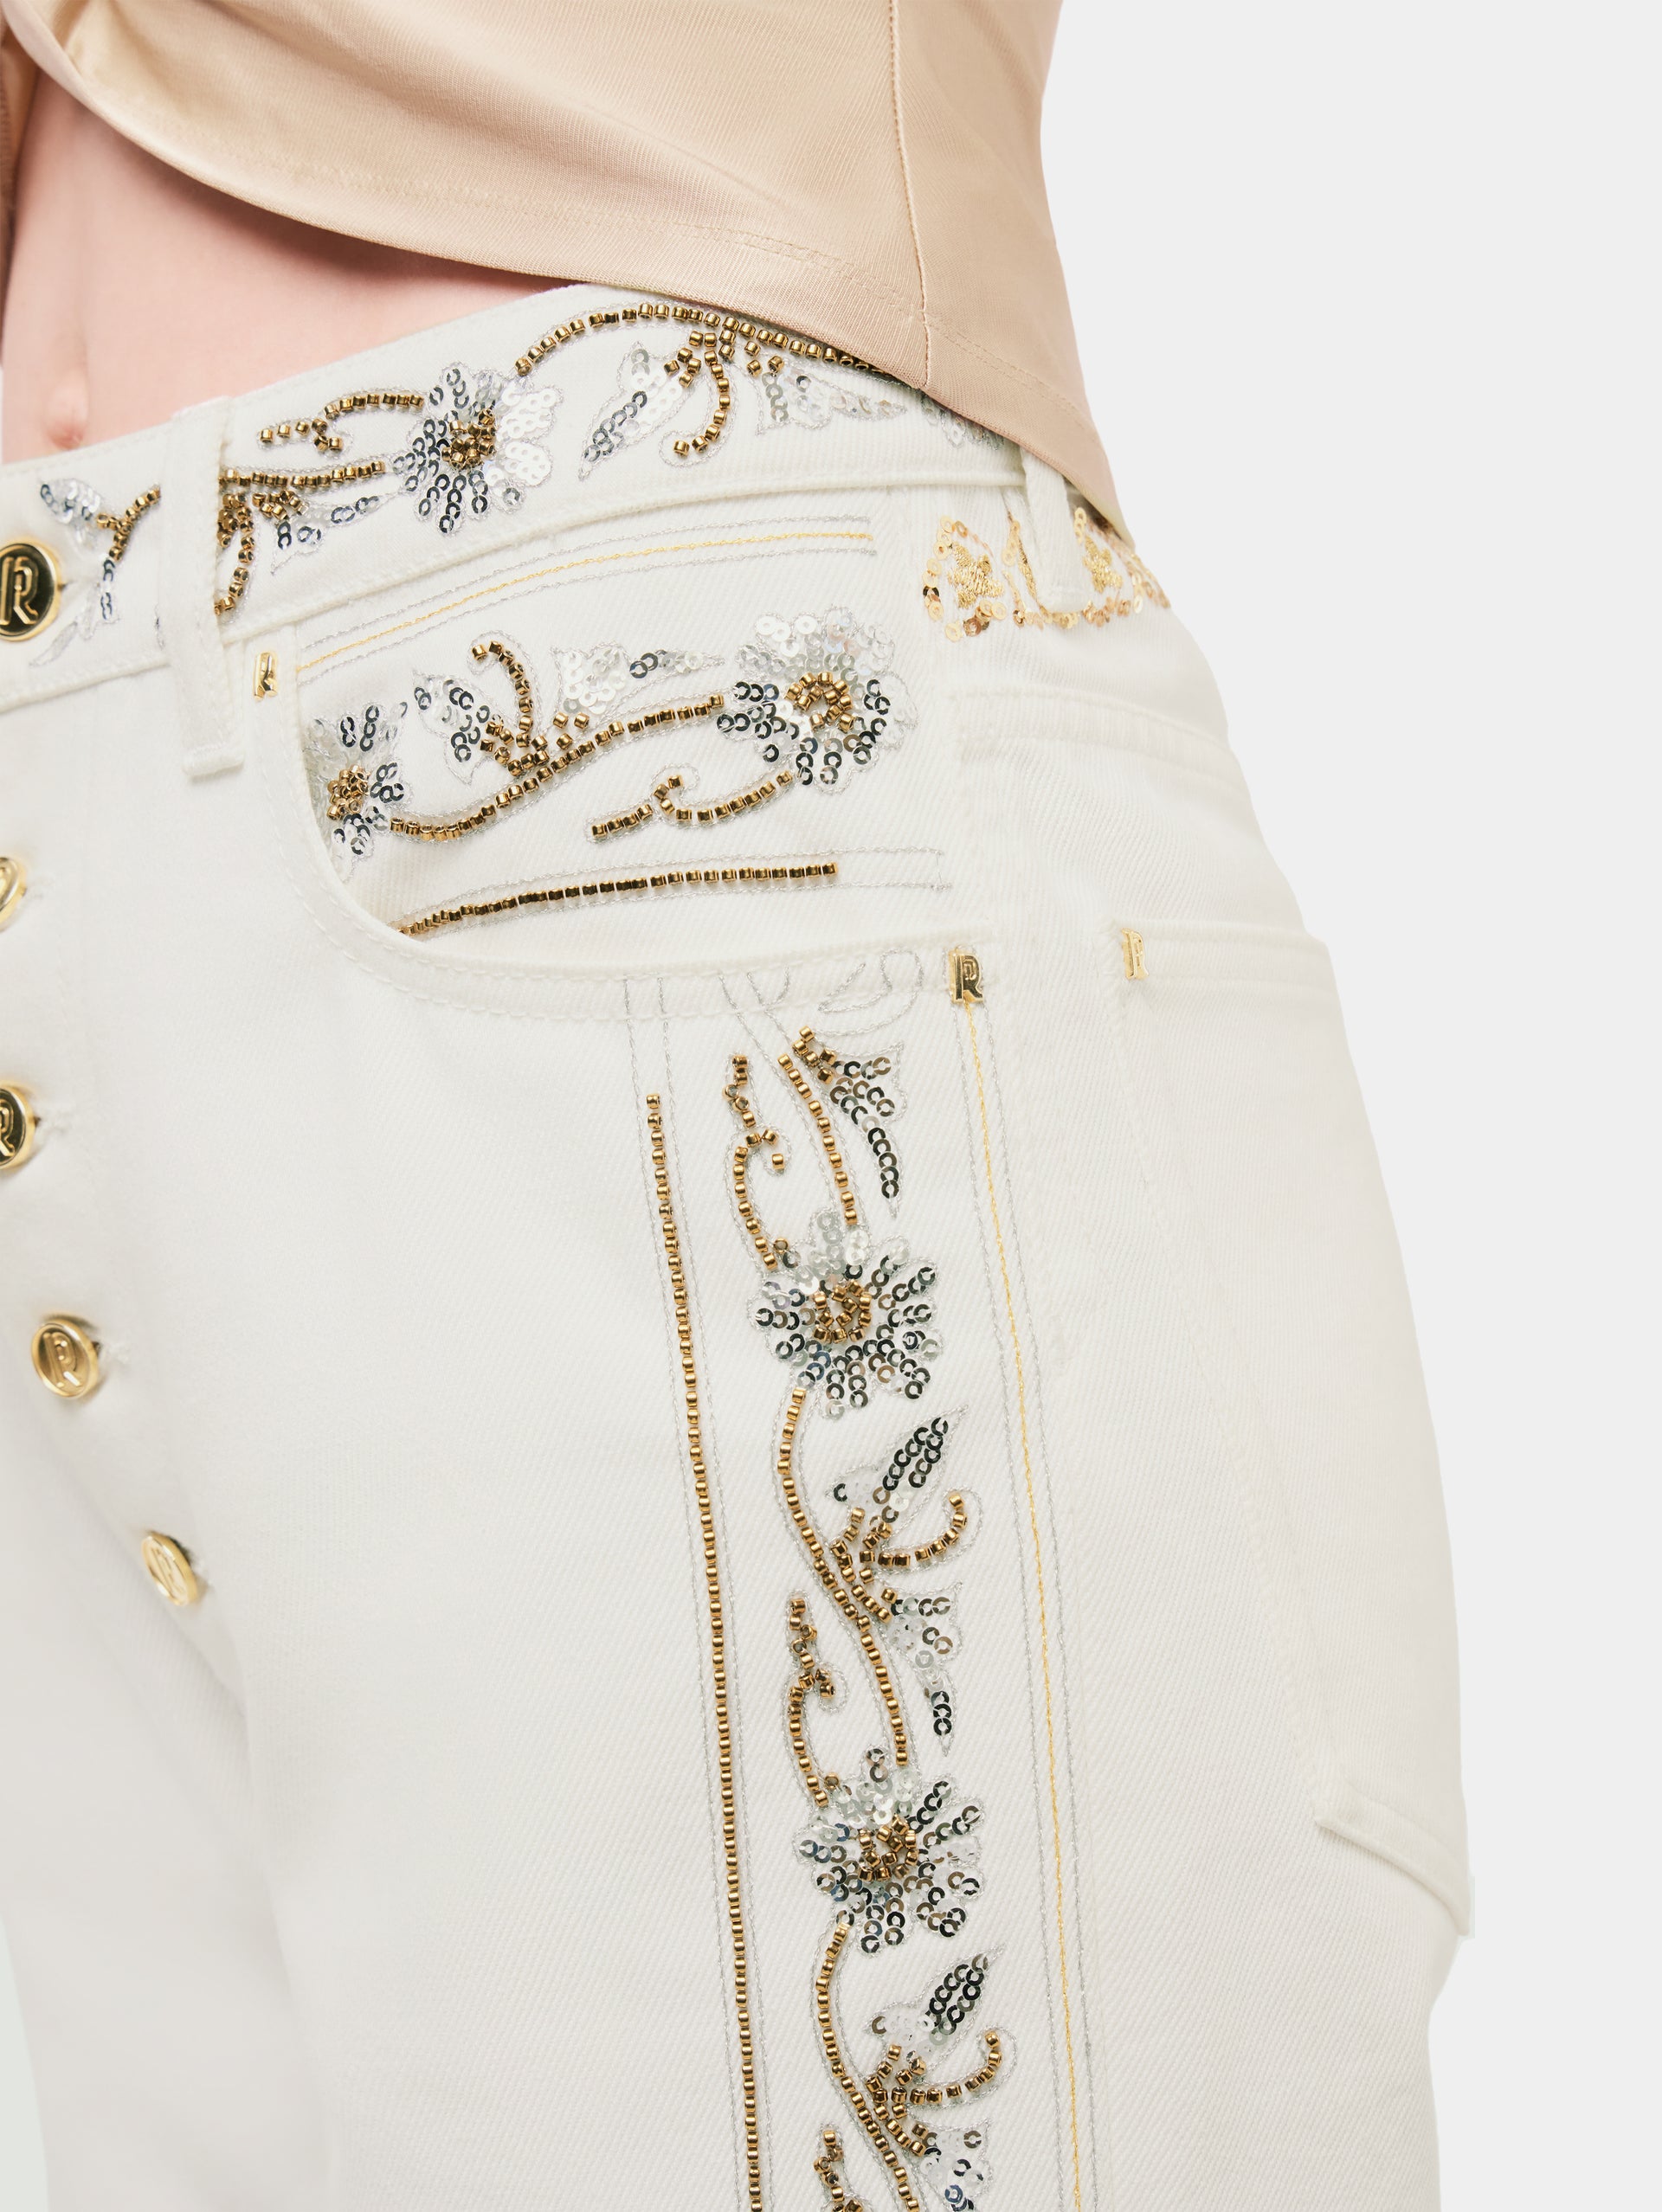 Embroidered off white denim jeans